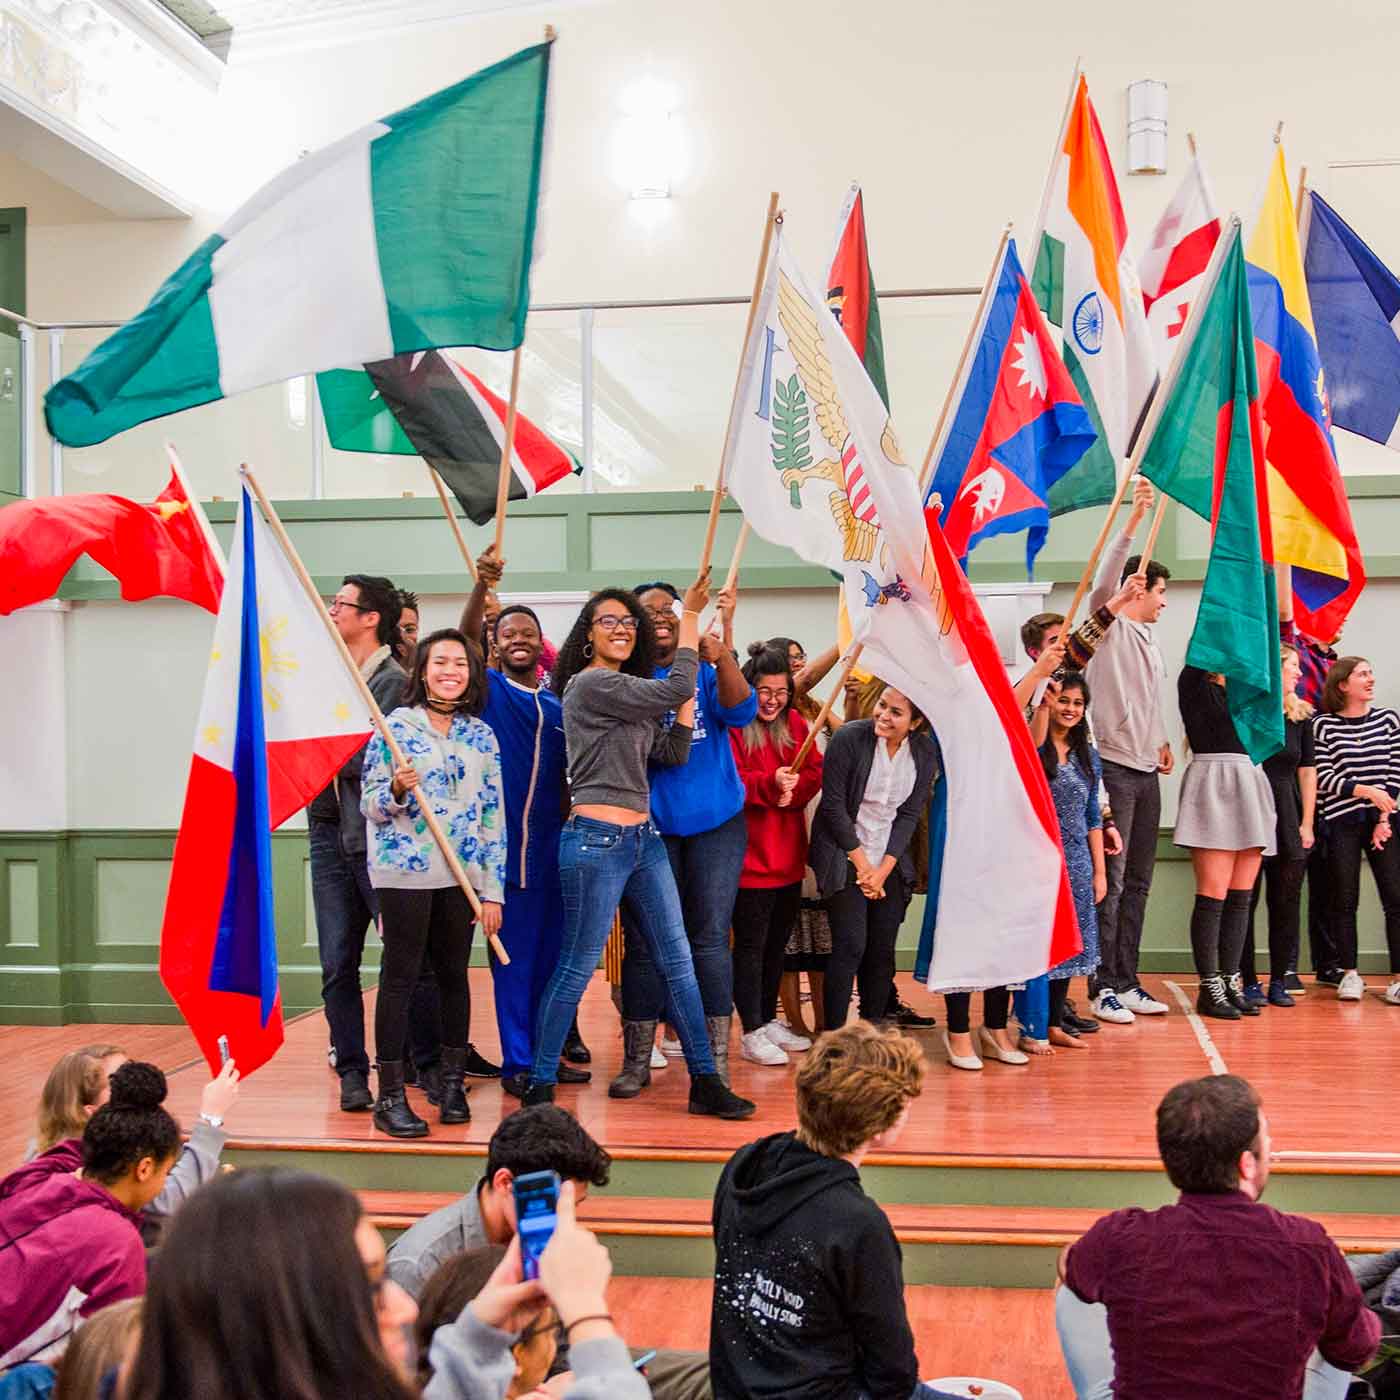 Students on stage with international flags